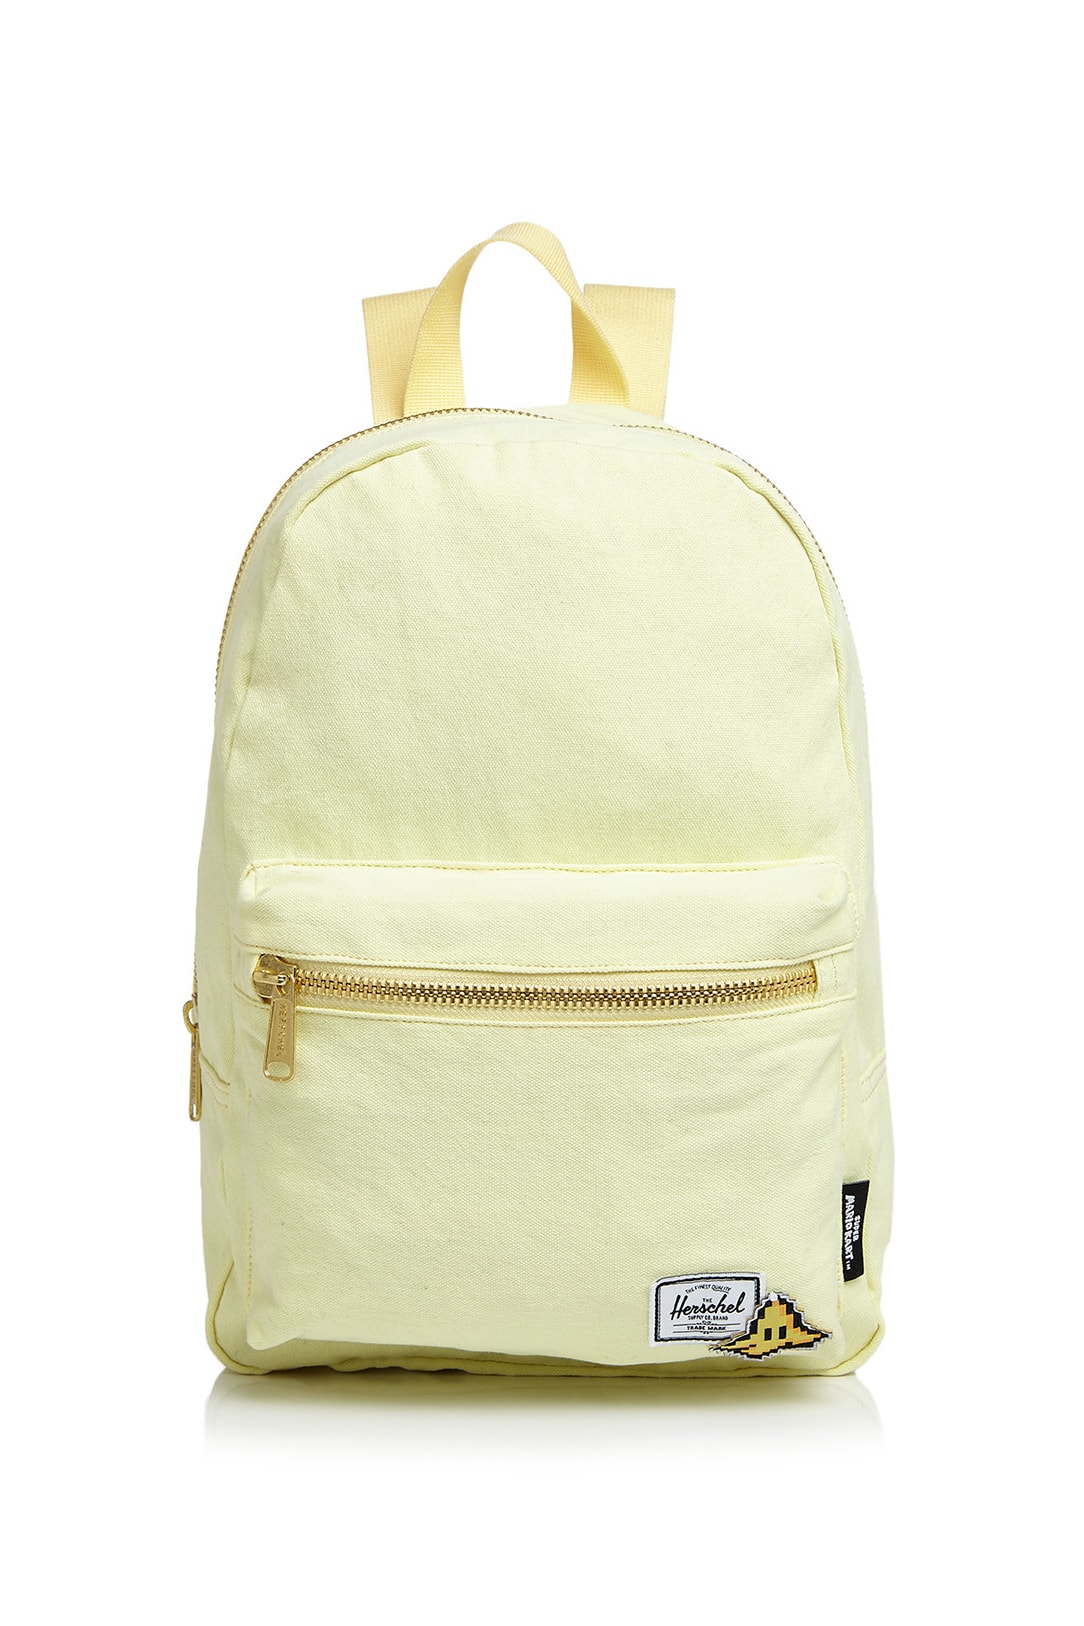 Bloomingdale's x Nintendo National Gamer Day Capsule Collection Herschel Supply Backpack Yellow